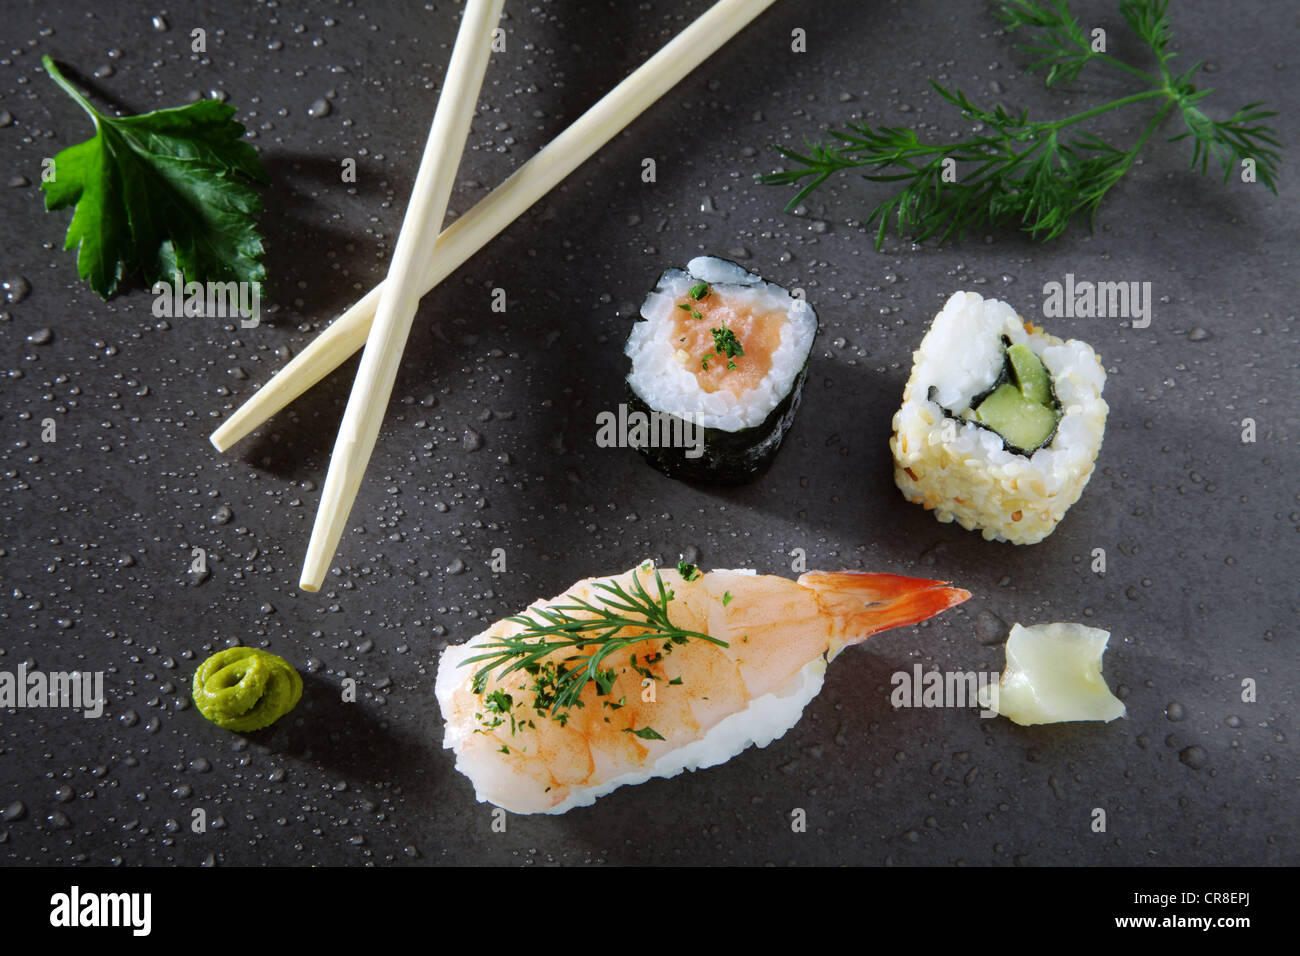 Assorted sushi with ginger and wasabi on a stone surface Stock Photo